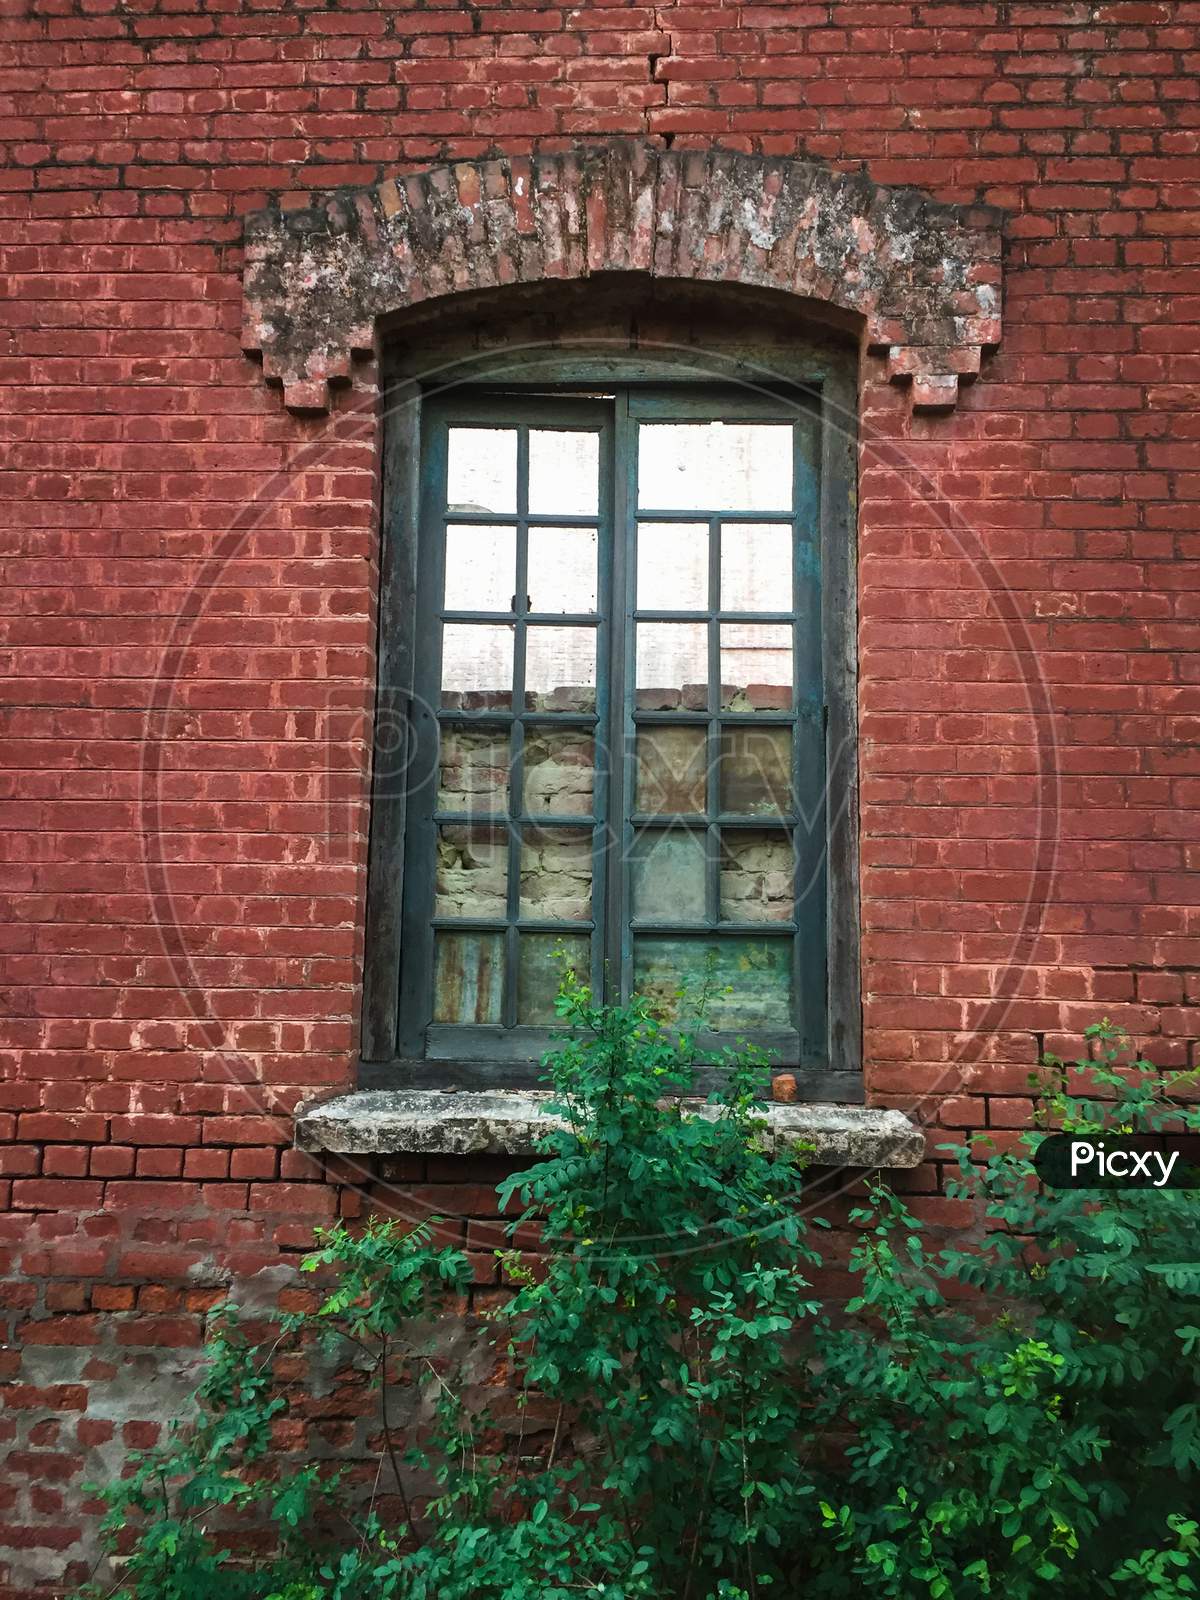 Agra/India - May 8, 2020: old wooden window in agra red fort, Agra Tourism